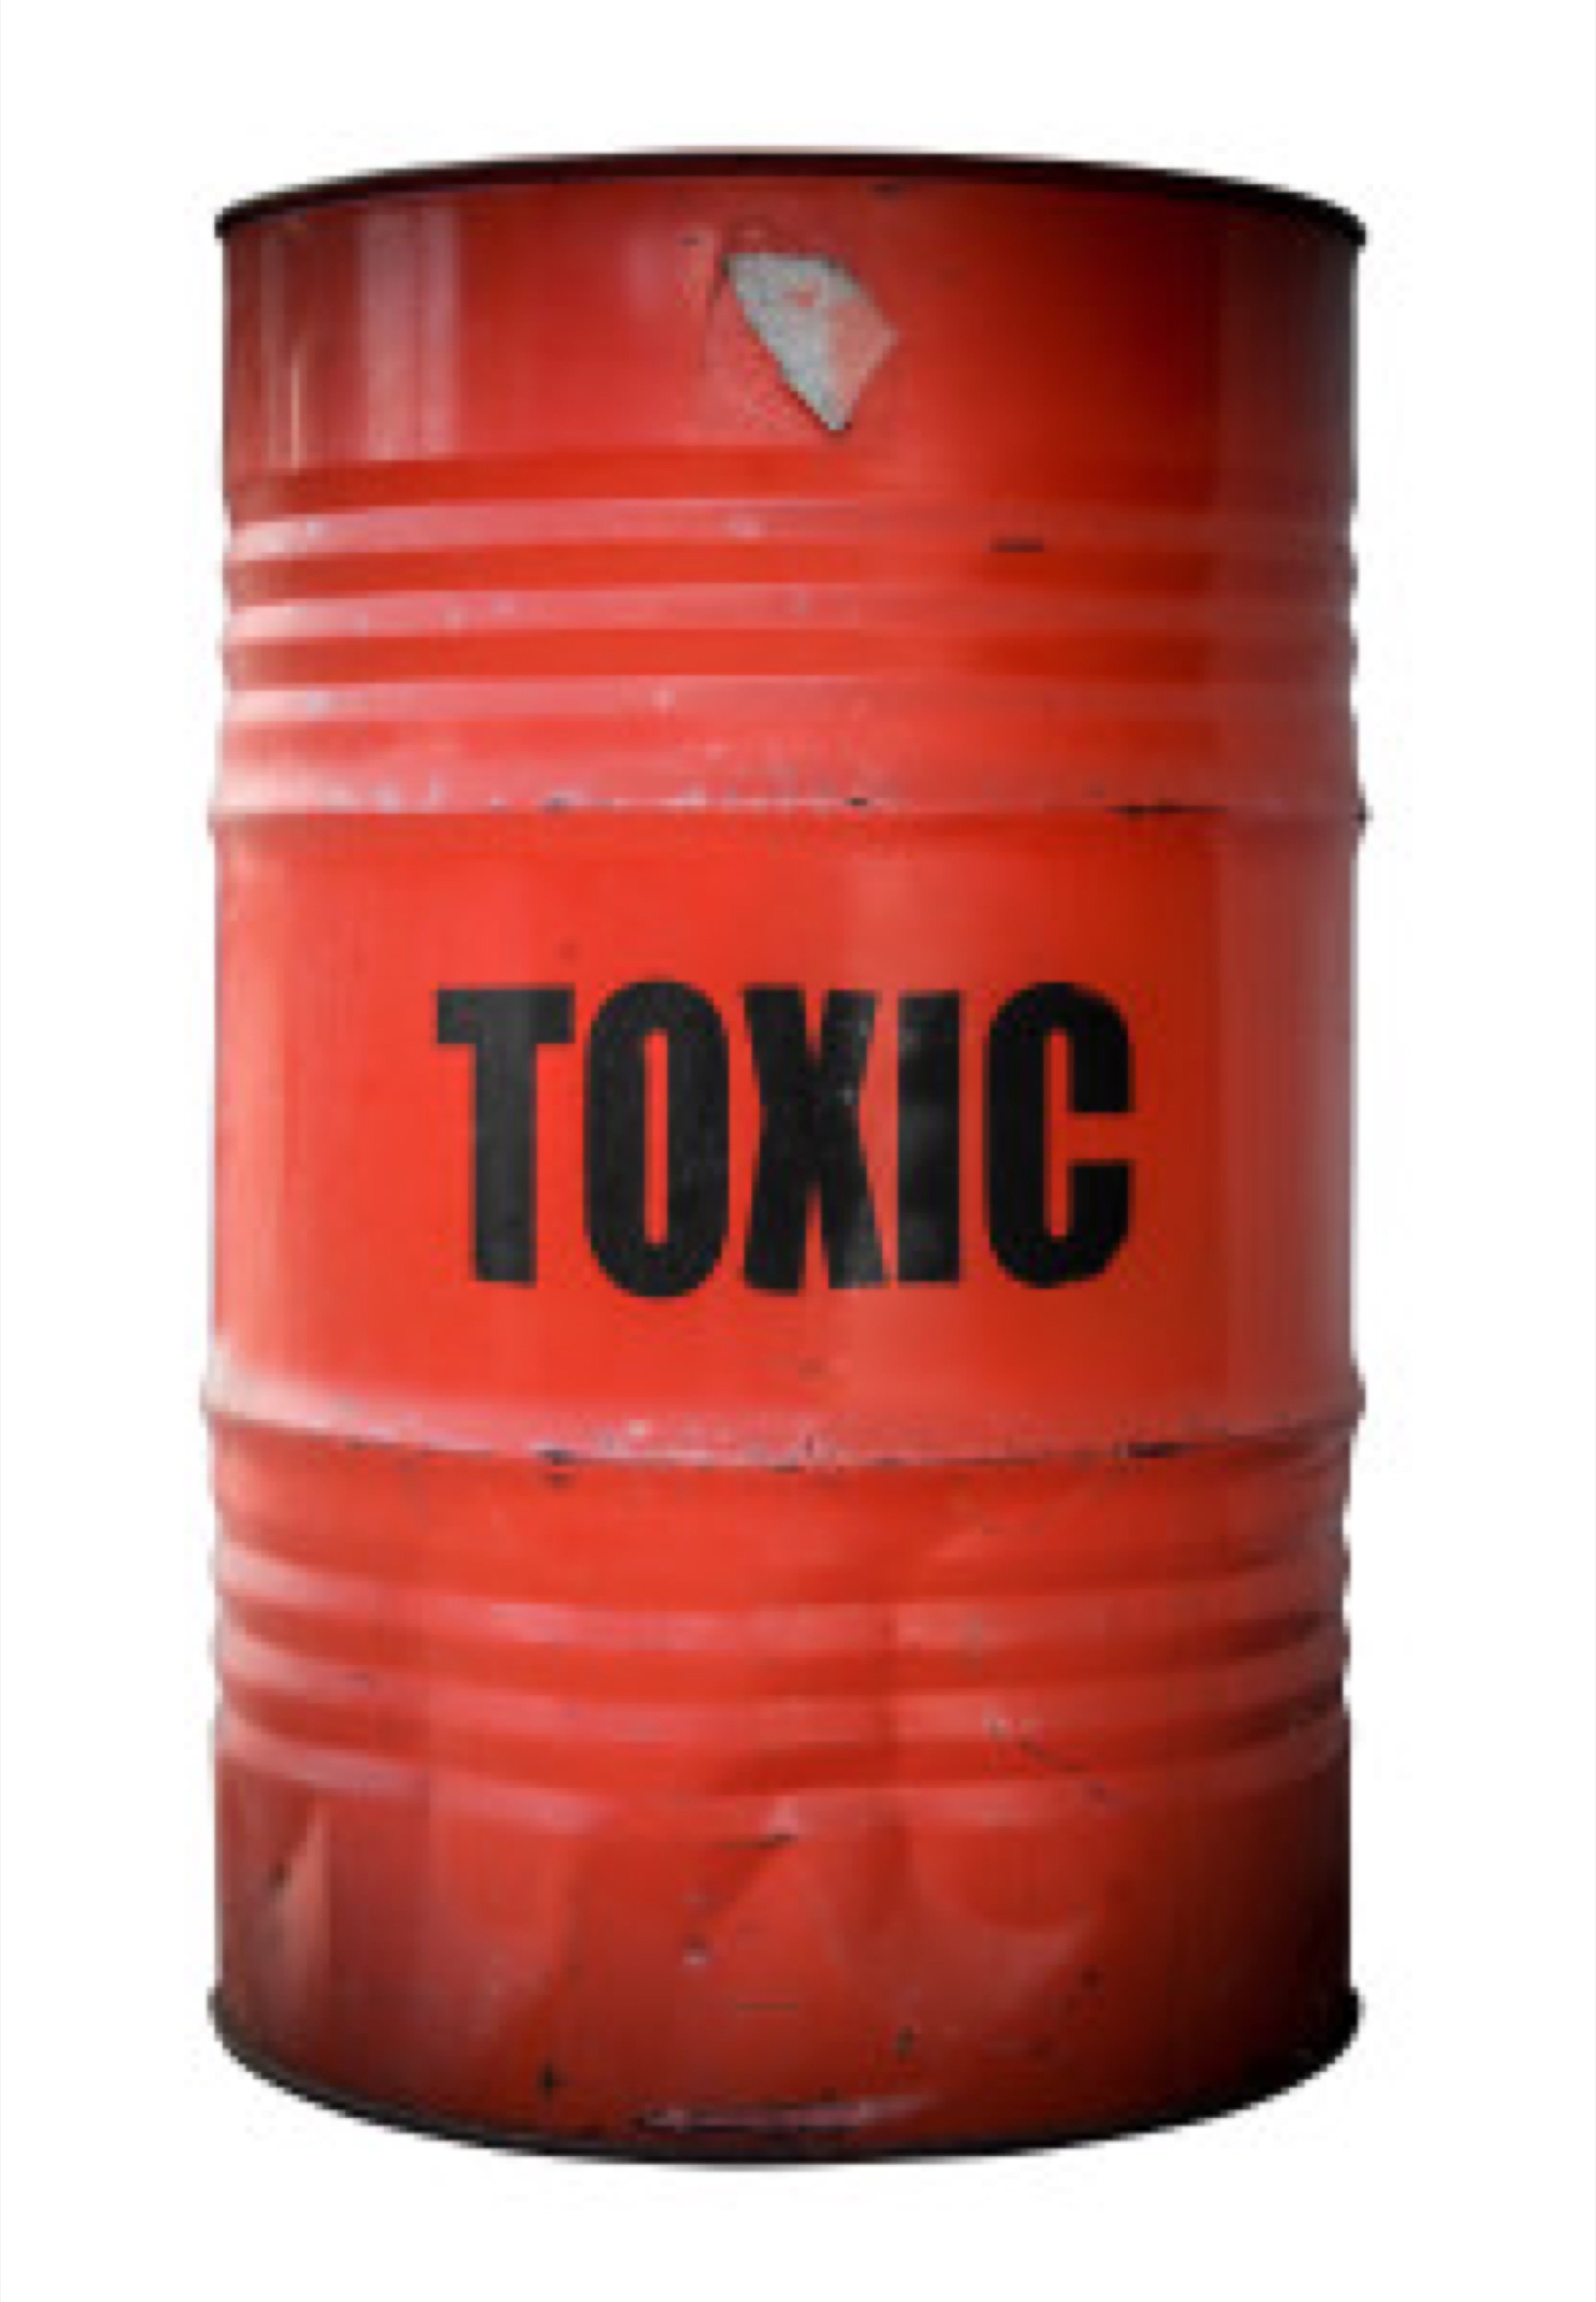 A Grunge Red Barrel Or Drum Filled With Toxic Waste